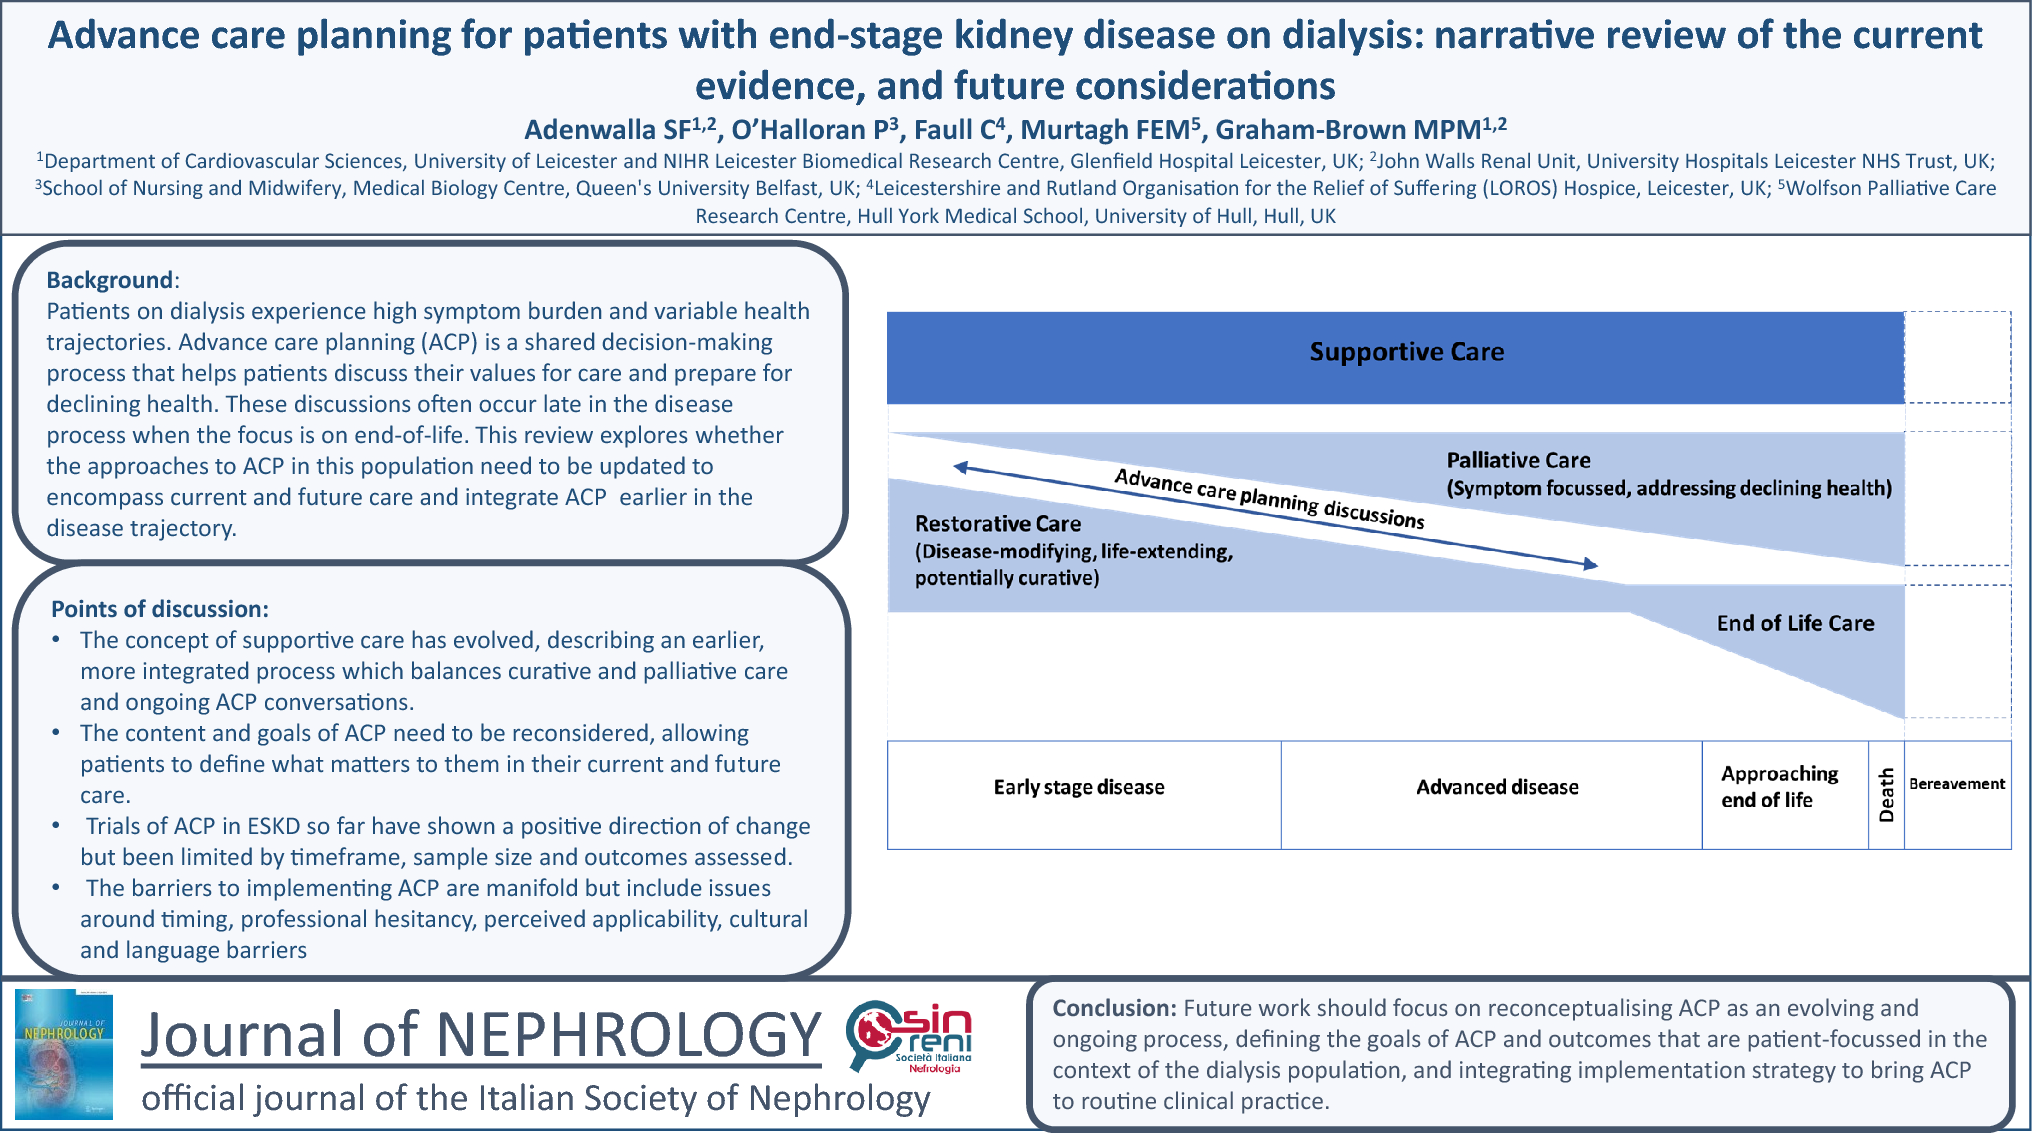 Advance care planning for patients with end-stage kidney disease on dialysis: narrative review of the current evidence, and future considerations